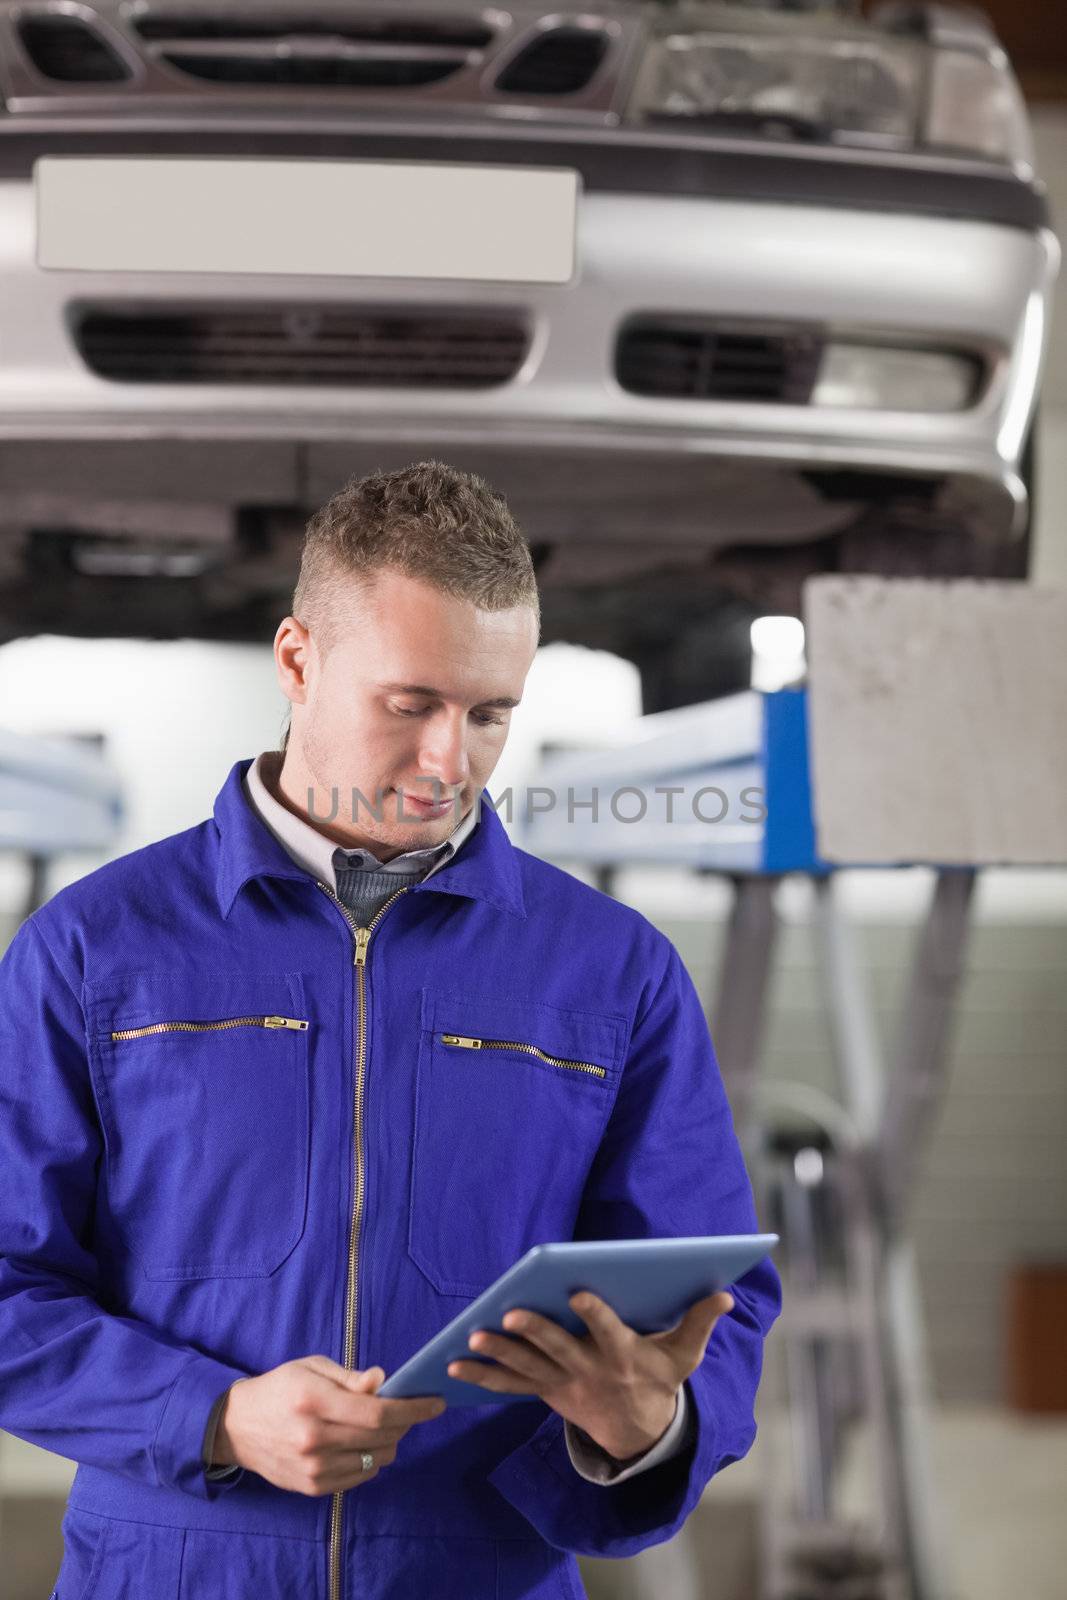 Mechanic looking at a tablet computer while holding it by Wavebreakmedia